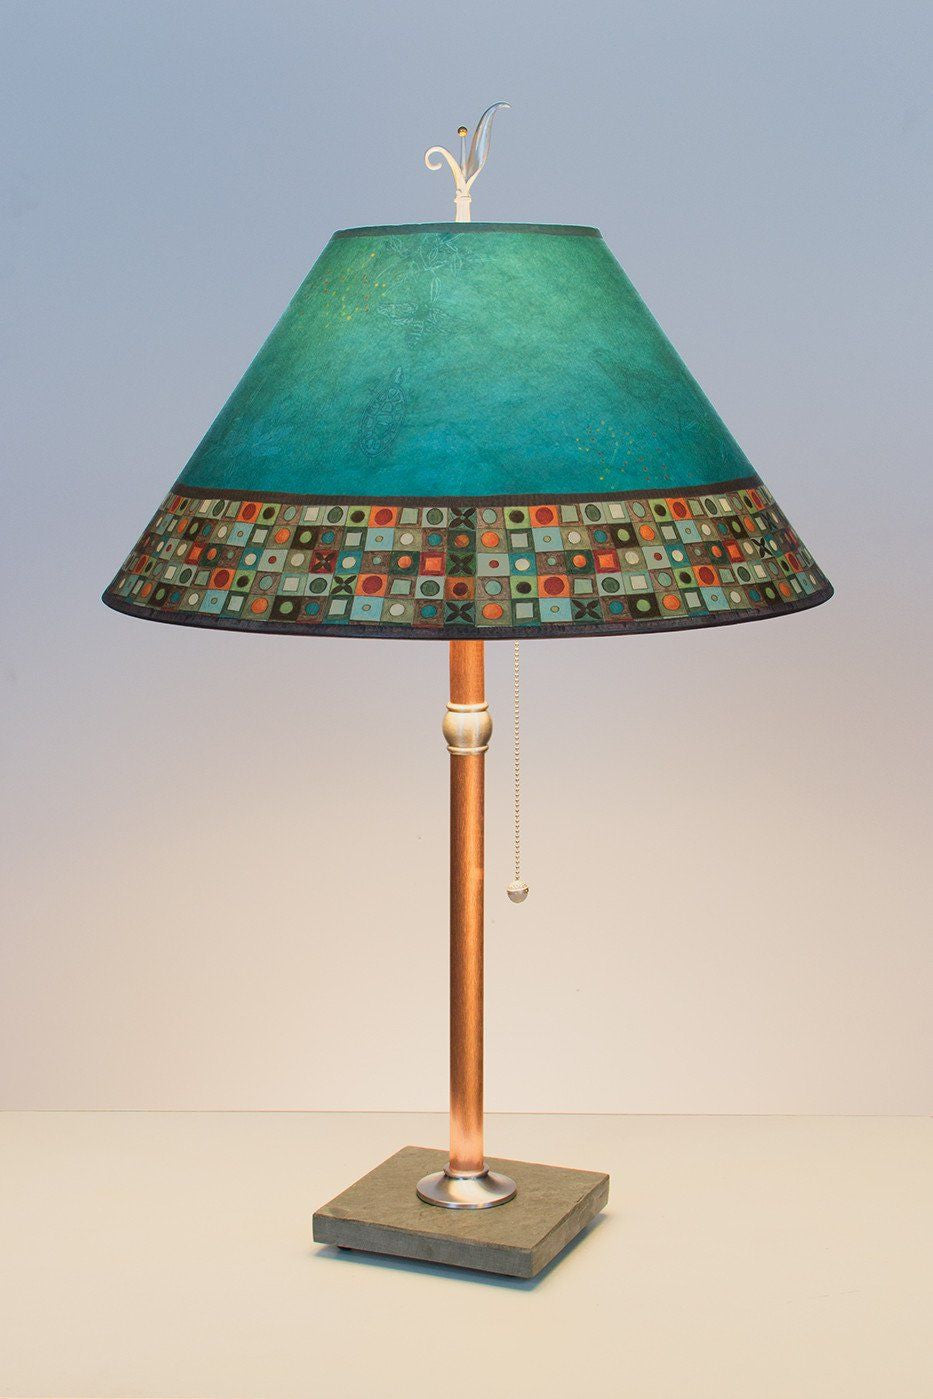 Janna Ugone &amp; Co Table Lamps Copper Table Lamp with Large Conical Shade in Jade Mosaic